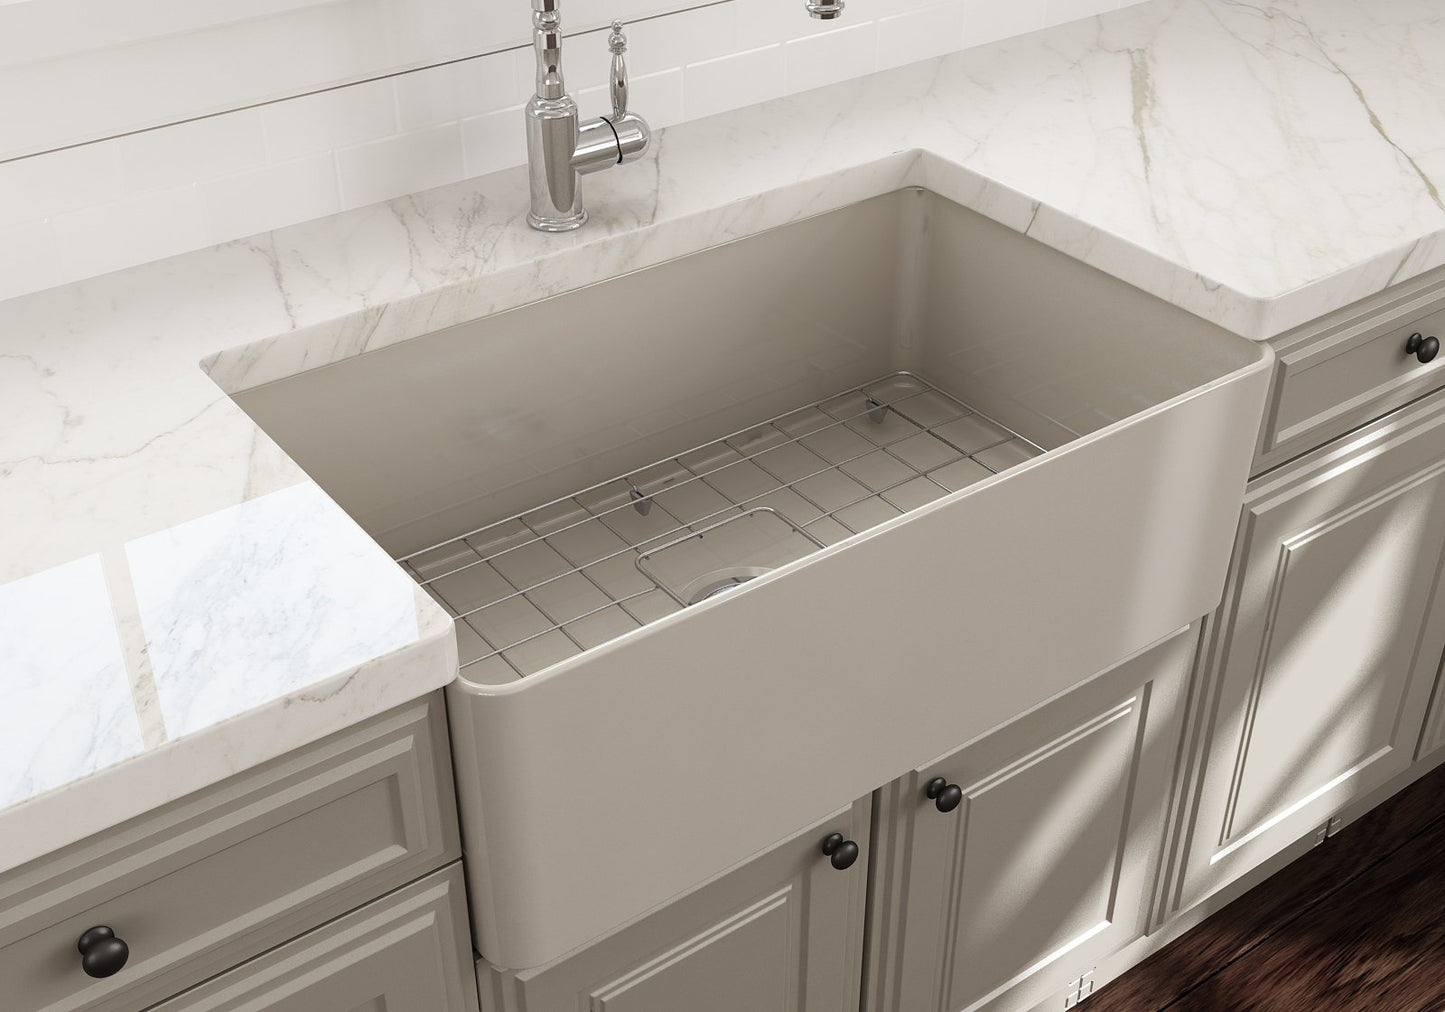 Bocchi Ultra-Slim Farmhouse Apron Front Fireclay 30" Single Bowl Kitchen Sink (Call for special pricing)